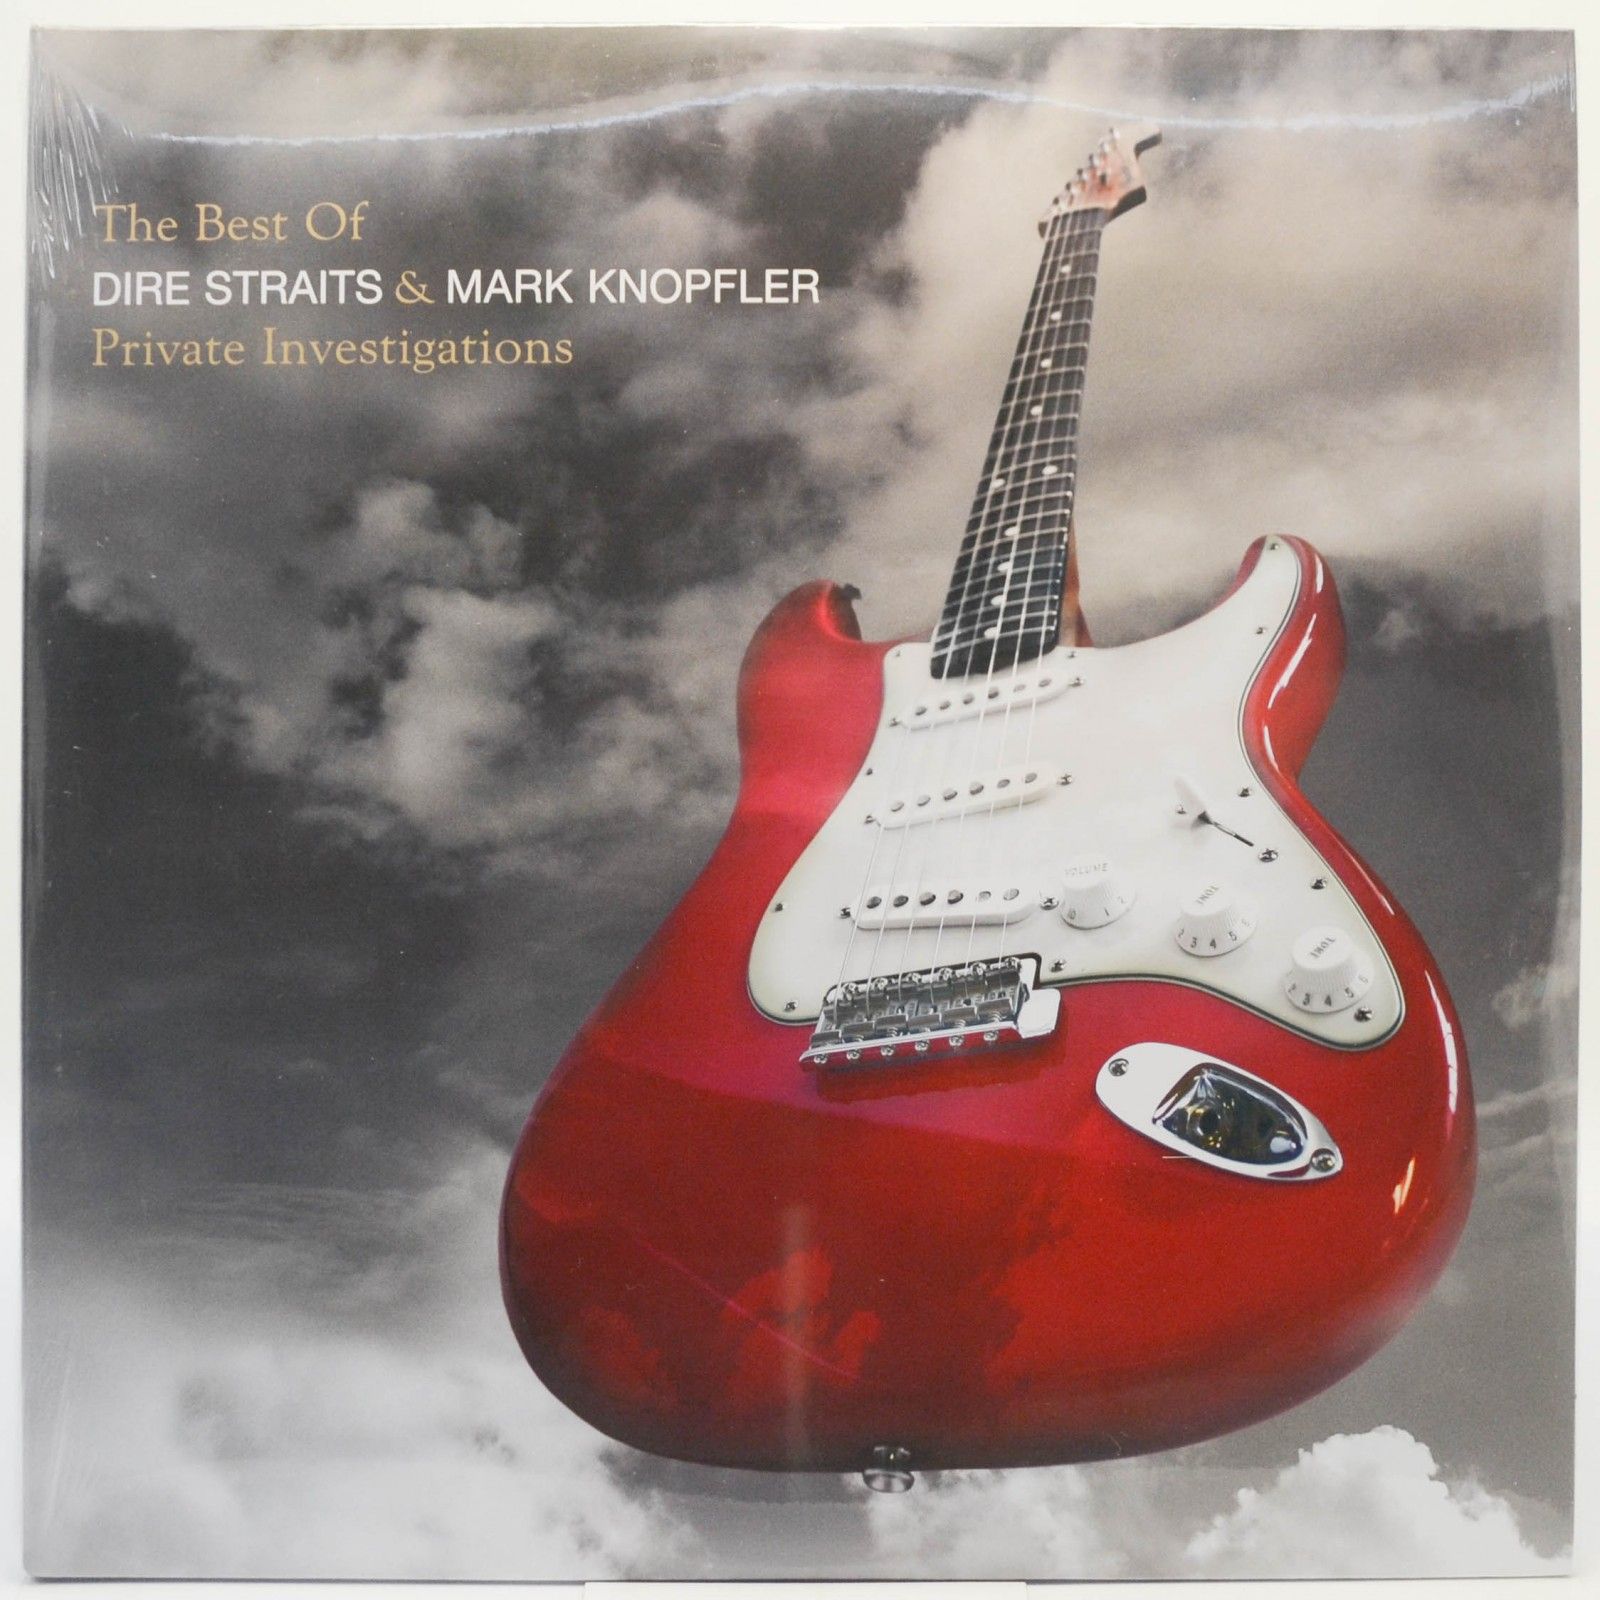 Dire Straits & Mark Knopfler — Private Investigations (The Best Of) (2LP), 2005